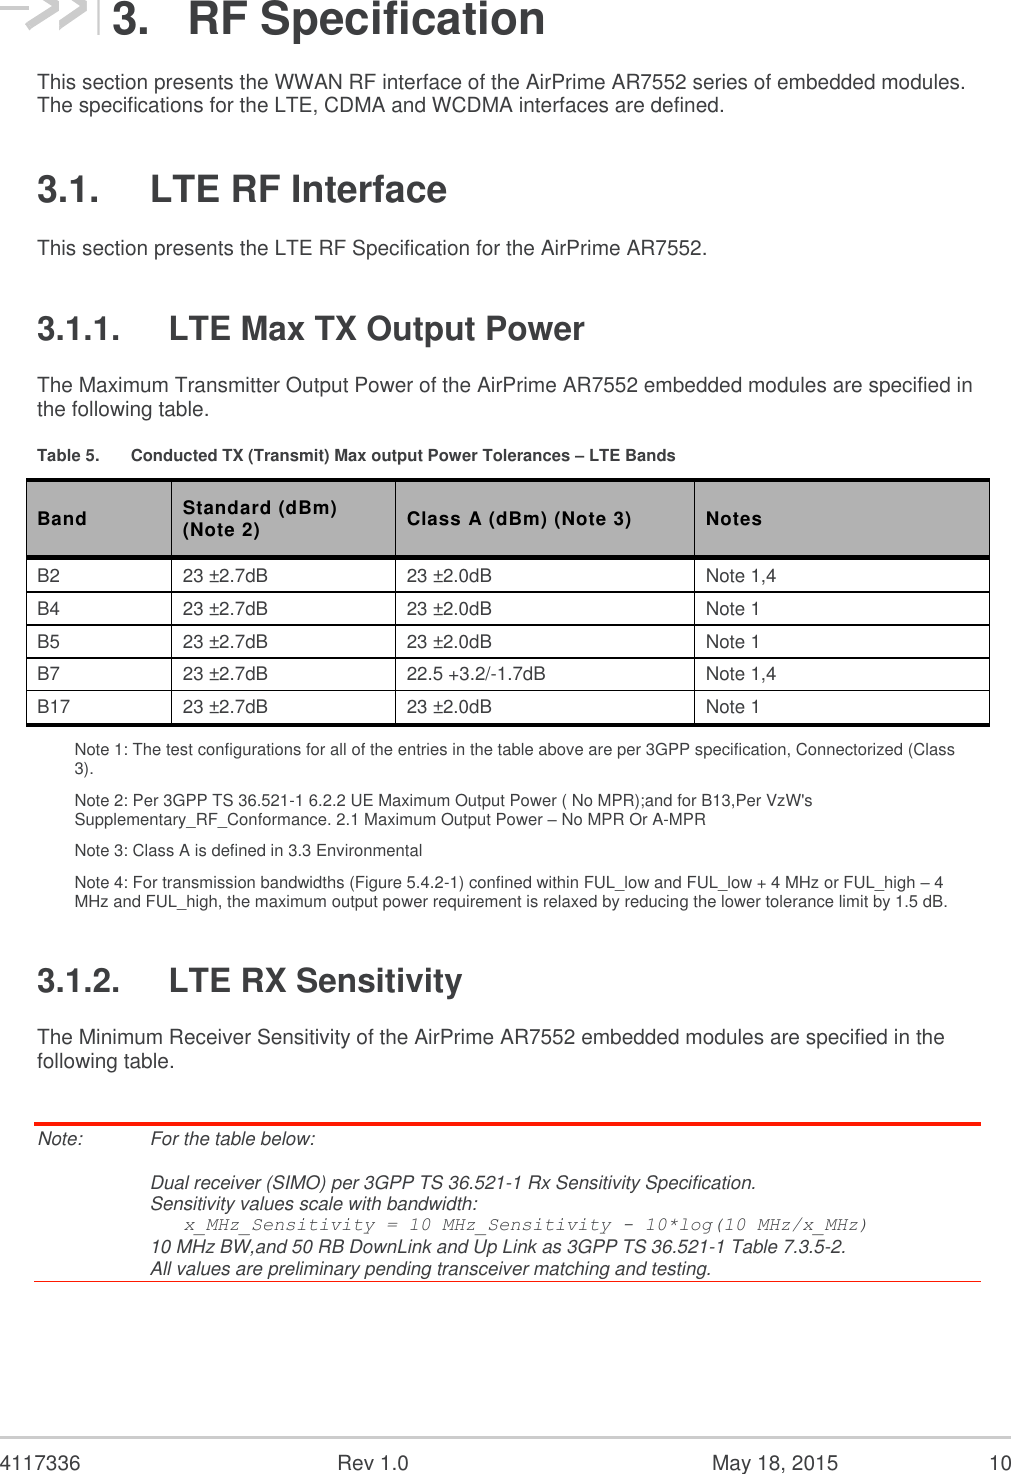  4117336  Rev 1.0  May 18, 2015  10 3.  RF Specification This section presents the WWAN RF interface of the AirPrime AR7552 series of embedded modules. The specifications for the LTE, CDMA and WCDMA interfaces are defined. 3.1.  LTE RF Interface This section presents the LTE RF Specification for the AirPrime AR7552. 3.1.1.  LTE Max TX Output Power The Maximum Transmitter Output Power of the AirPrime AR7552 embedded modules are specified in the following table. Table 5.  Conducted TX (Transmit) Max output Power Tolerances – LTE Bands Band Standard (dBm) (Note 2) Class A (dBm) (Note 3) Notes B2 23 ±2.7dB 23 ±2.0dB Note 1,4 B4 23 ±2.7dB 23 ±2.0dB Note 1 B5 23 ±2.7dB 23 ±2.0dB Note 1 B7 23 ±2.7dB 22.5 +3.2/-1.7dB Note 1,4 B17 23 ±2.7dB 23 ±2.0dB Note 1 Note 1: The test configurations for all of the entries in the table above are per 3GPP specification, Connectorized (Class 3). Note 2: Per 3GPP TS 36.521-1 6.2.2 UE Maximum Output Power ( No MPR);and for B13,Per VzW&apos;s Supplementary_RF_Conformance. 2.1 Maximum Output Power – No MPR Or A-MPR Note 3: Class A is defined in 3.3 Environmental Note 4: For transmission bandwidths (Figure 5.4.2-1) confined within FUL_low and FUL_low + 4 MHz or FUL_high – 4 MHz and FUL_high, the maximum output power requirement is relaxed by reducing the lower tolerance limit by 1.5 dB. 3.1.2.  LTE RX Sensitivity The Minimum Receiver Sensitivity of the AirPrime AR7552 embedded modules are specified in the following table.  Note:   For the table below:  Dual receiver (SIMO) per 3GPP TS 36.521-1 Rx Sensitivity Specification. Sensitivity values scale with bandwidth:    x_MHz_Sensitivity = 10 MHz_Sensitivity - 10*log(10 MHz/x_MHz) 10 MHz BW,and 50 RB DownLink and Up Link as 3GPP TS 36.521-1 Table 7.3.5-2. All values are preliminary pending transceiver matching and testing. 